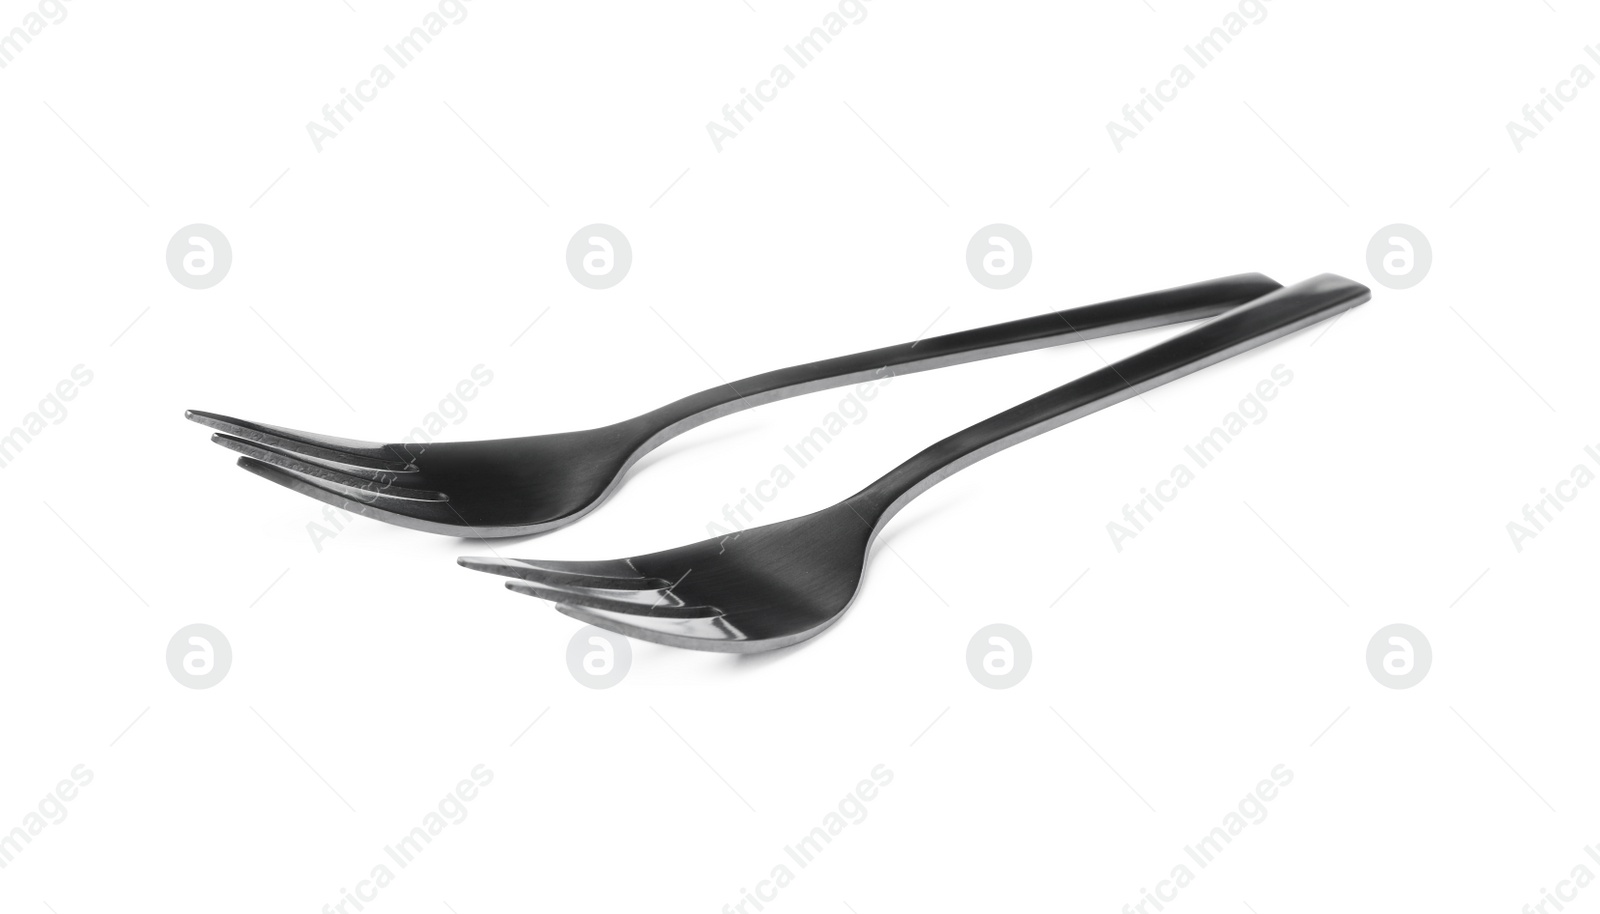 Photo of Clean shiny metal forks on white background